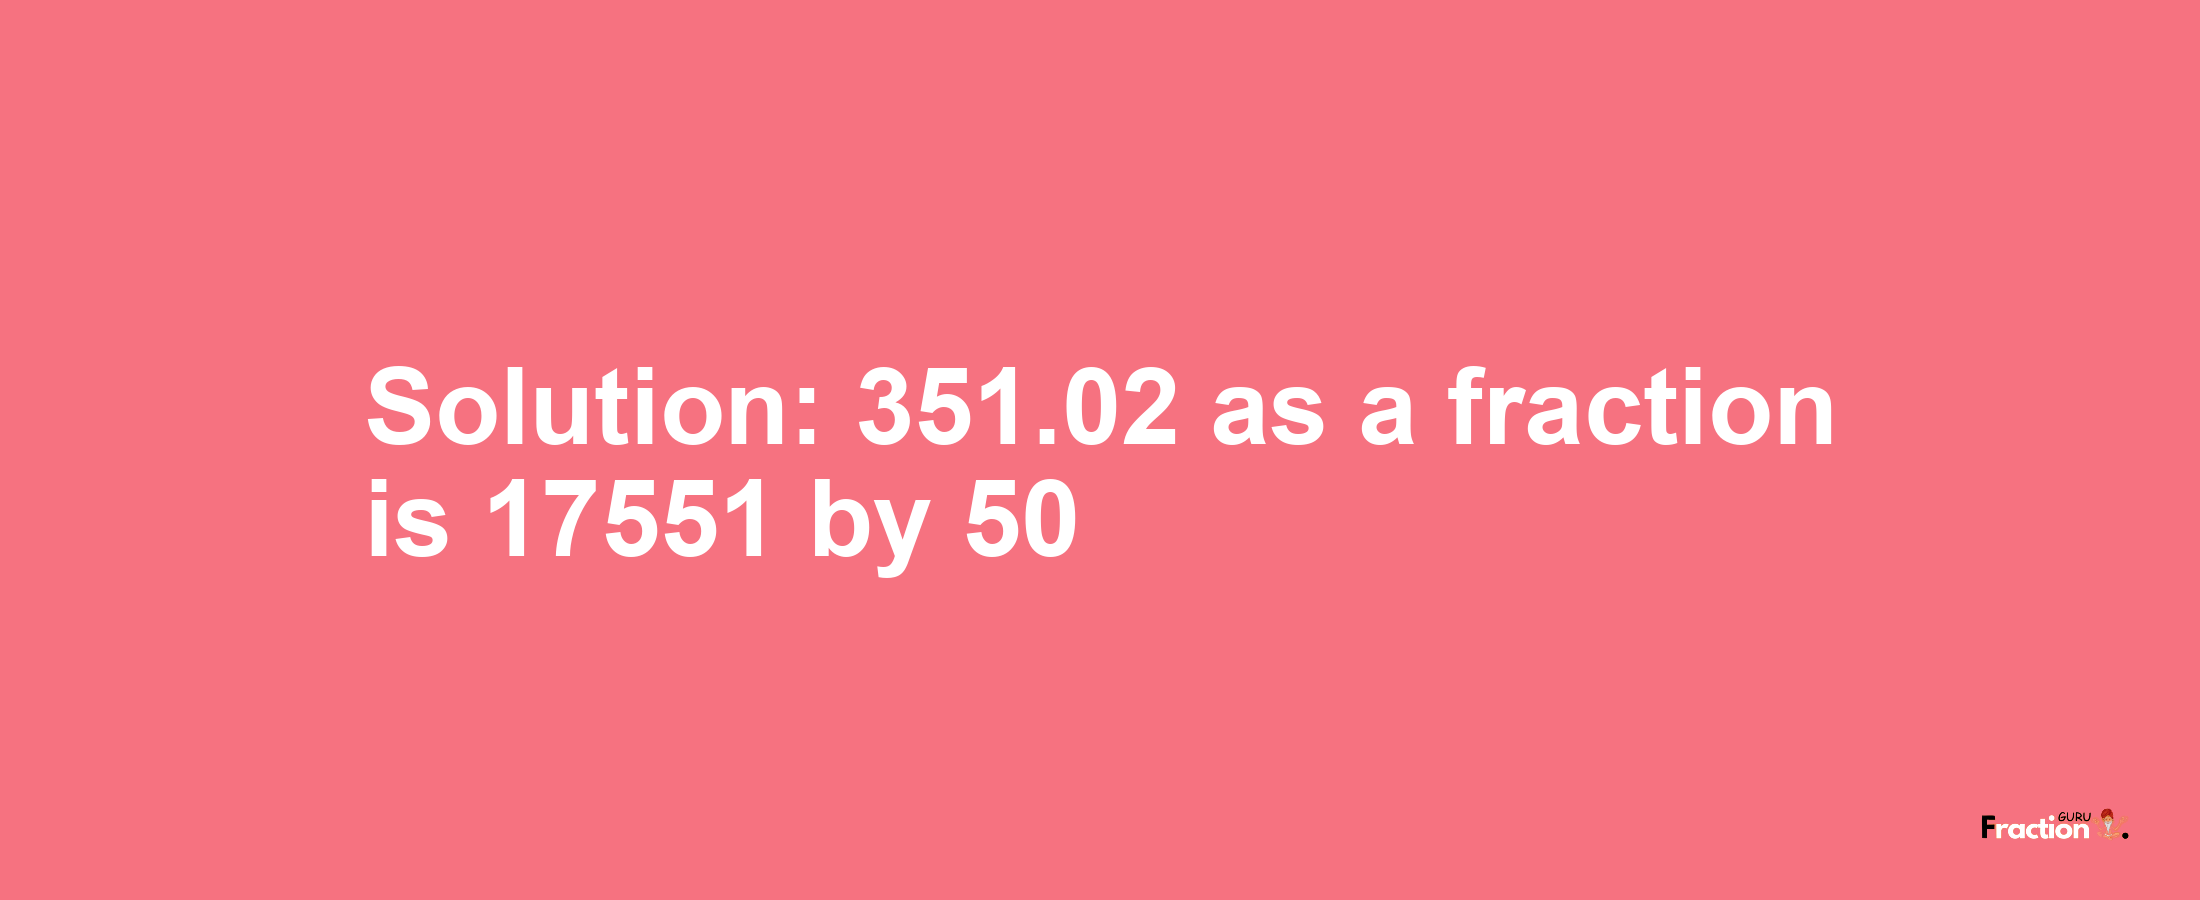 Solution:351.02 as a fraction is 17551/50